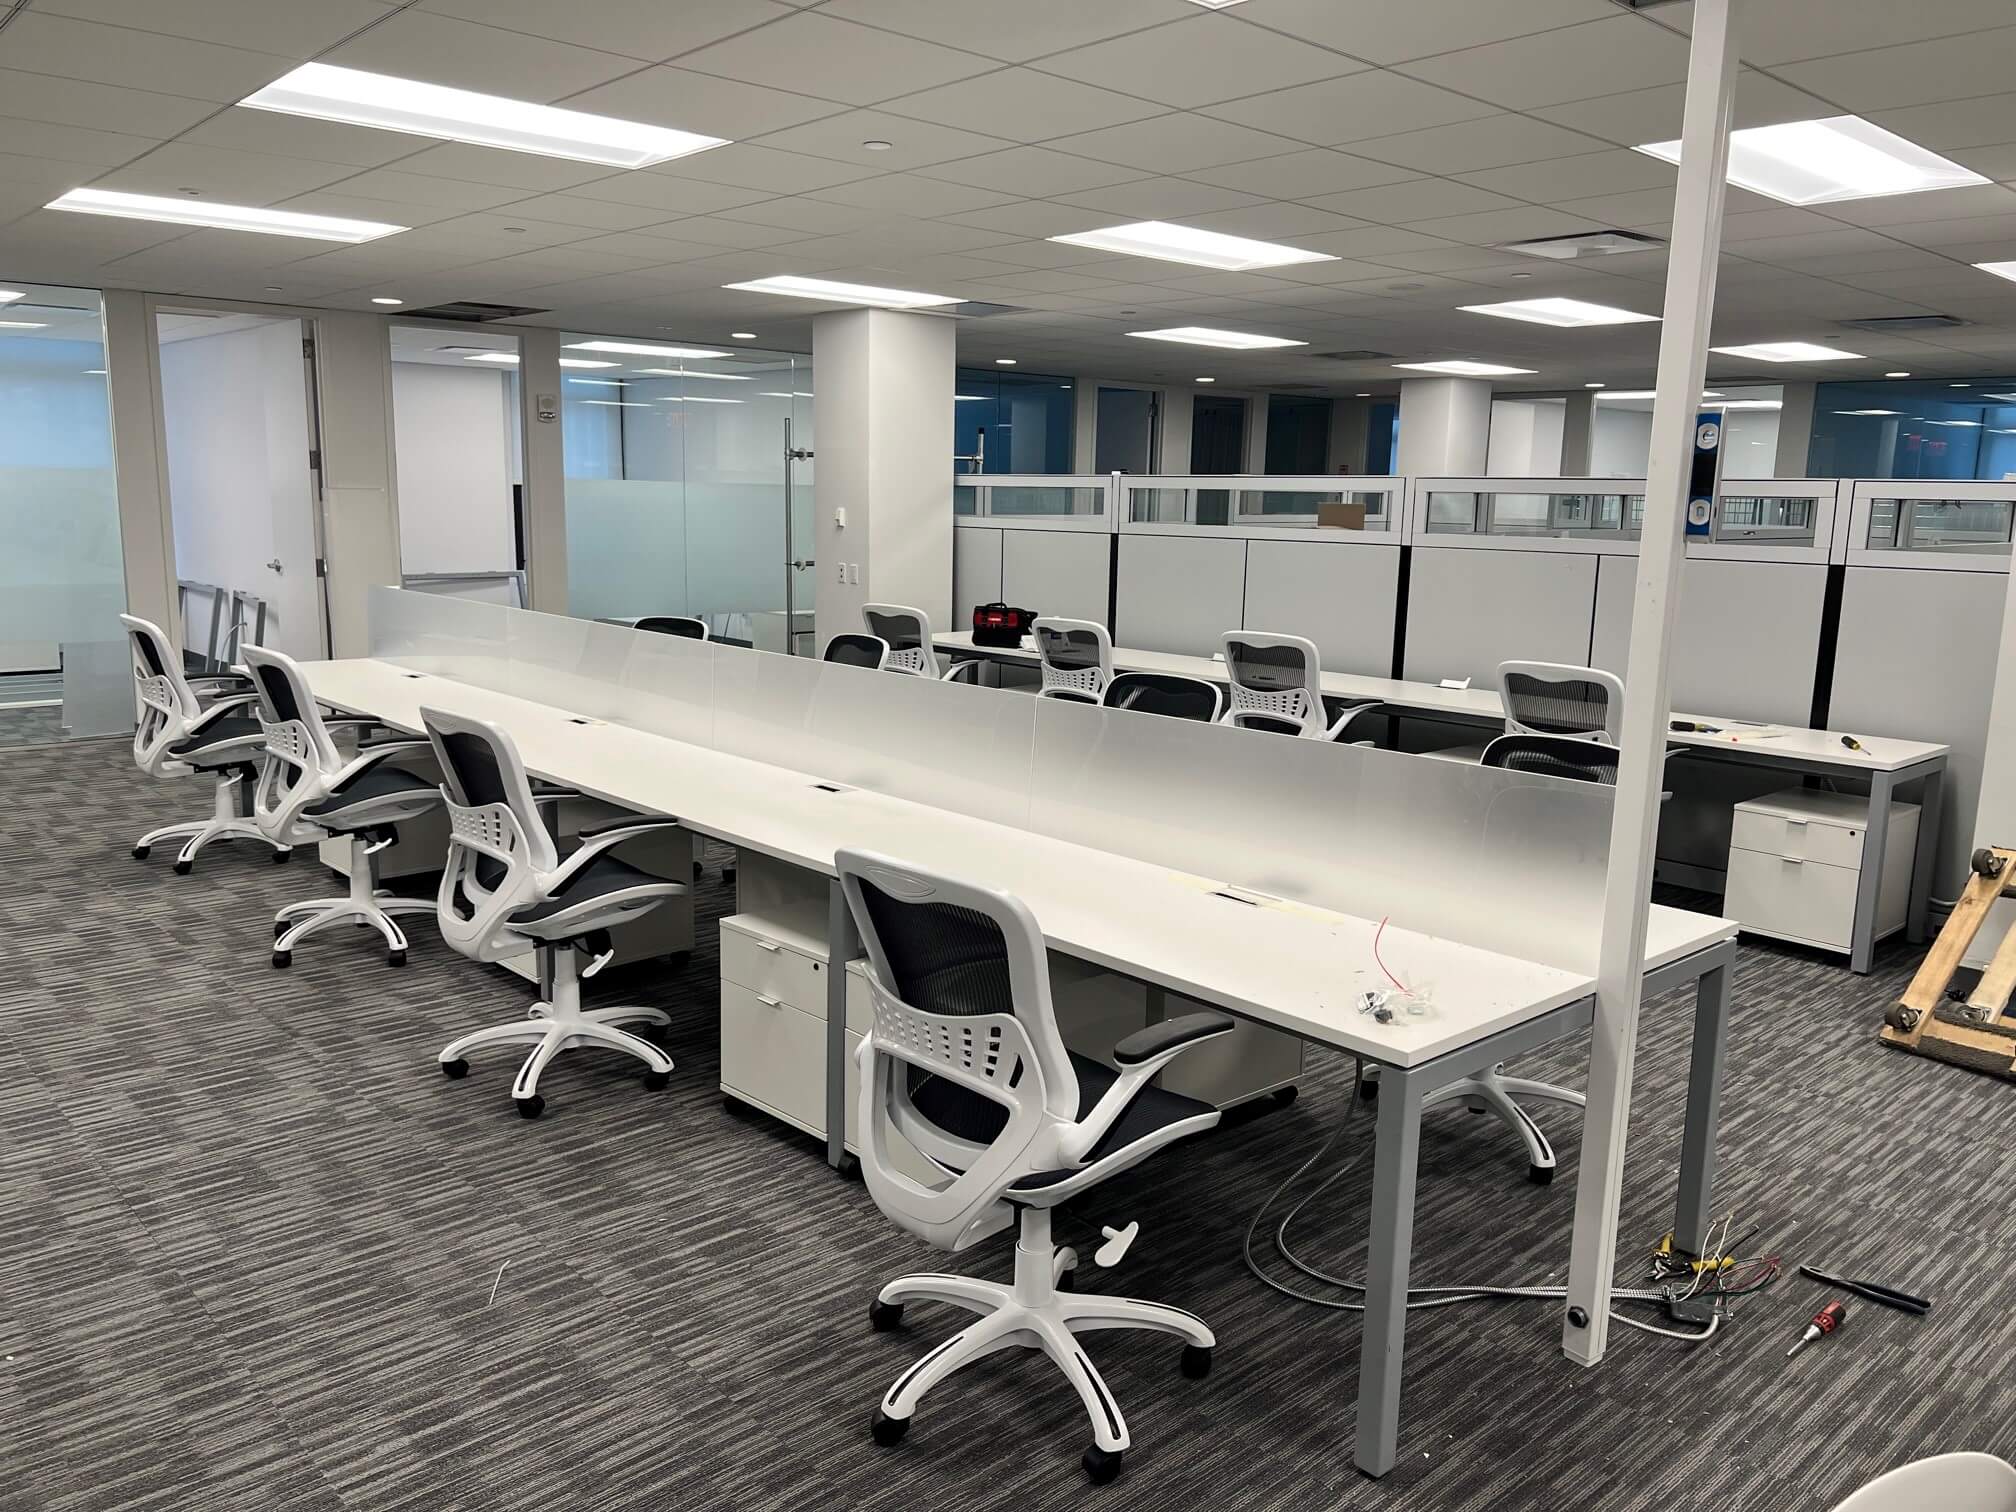 PTIOF, New Jersey’s top office furniture store offer a variety of styles that include wooden, metal, black, modern, co-working and small desks.